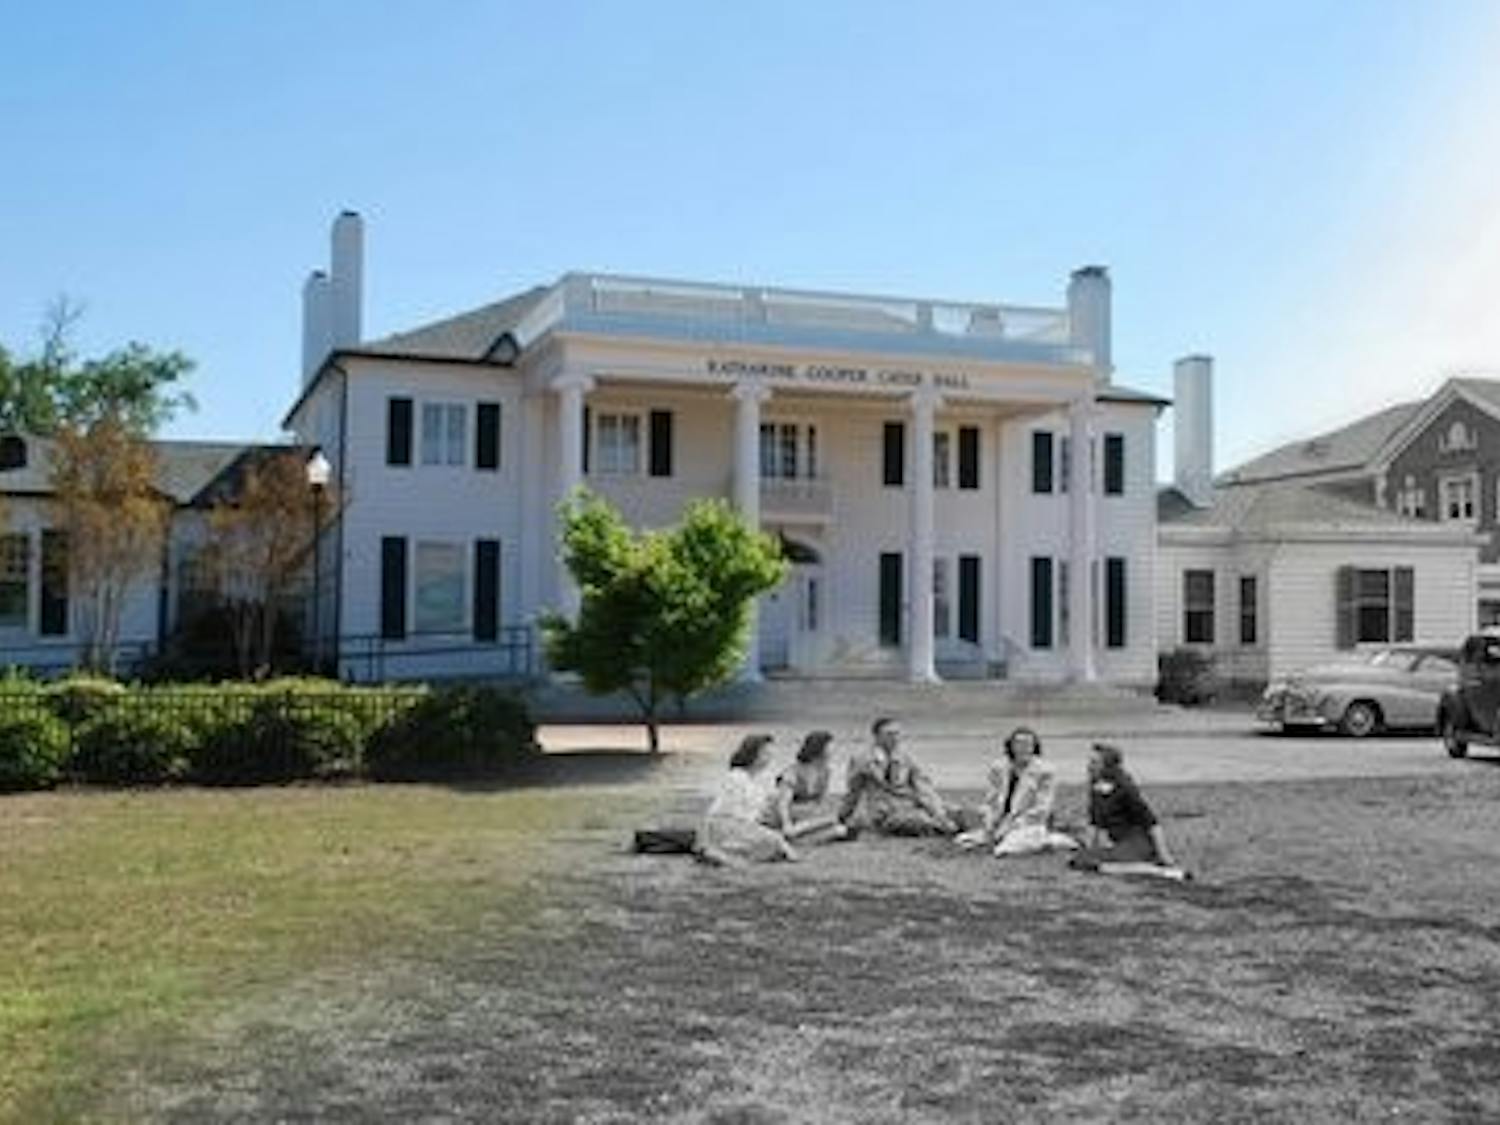 Jeffrey Bolan, junior in aerospace engineering, blends photographs of buildings from the past and present to show a changing Auburn. This photo of Cater Hall is the building in the present with former Auburn women gathering on the lawn. The parked cars indicate a road used to be nearby. (Courtesy of Jeffrey Bolan)